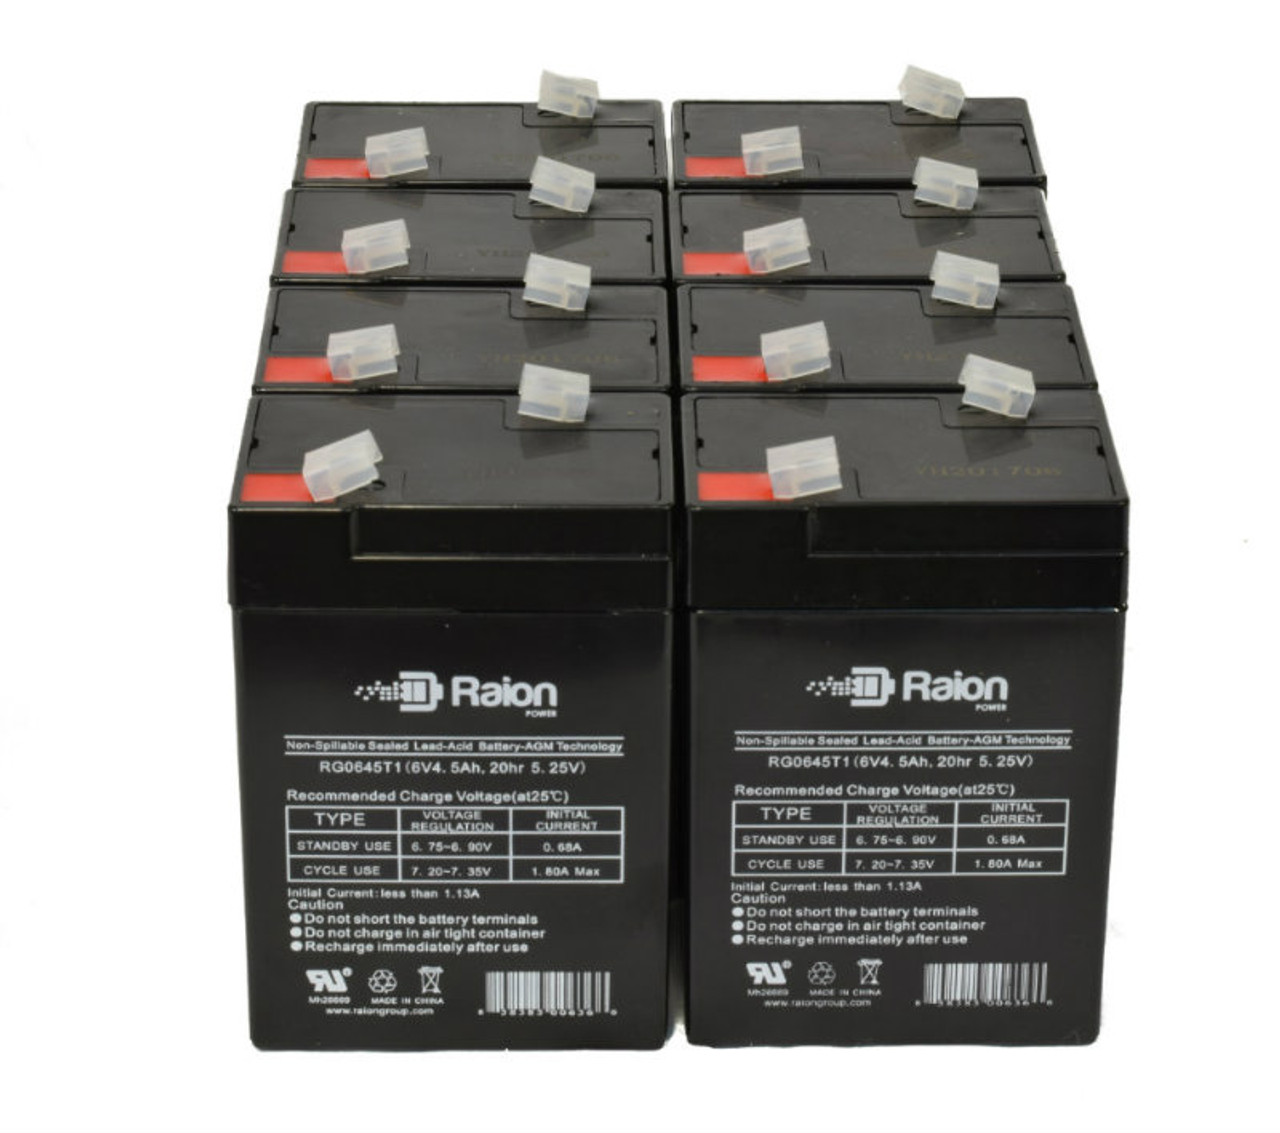 Raion Power RG0645T1 6V 4.5Ah Replacement Medical Equipment Battery for Nellcor NPB 195 - 8 Pack